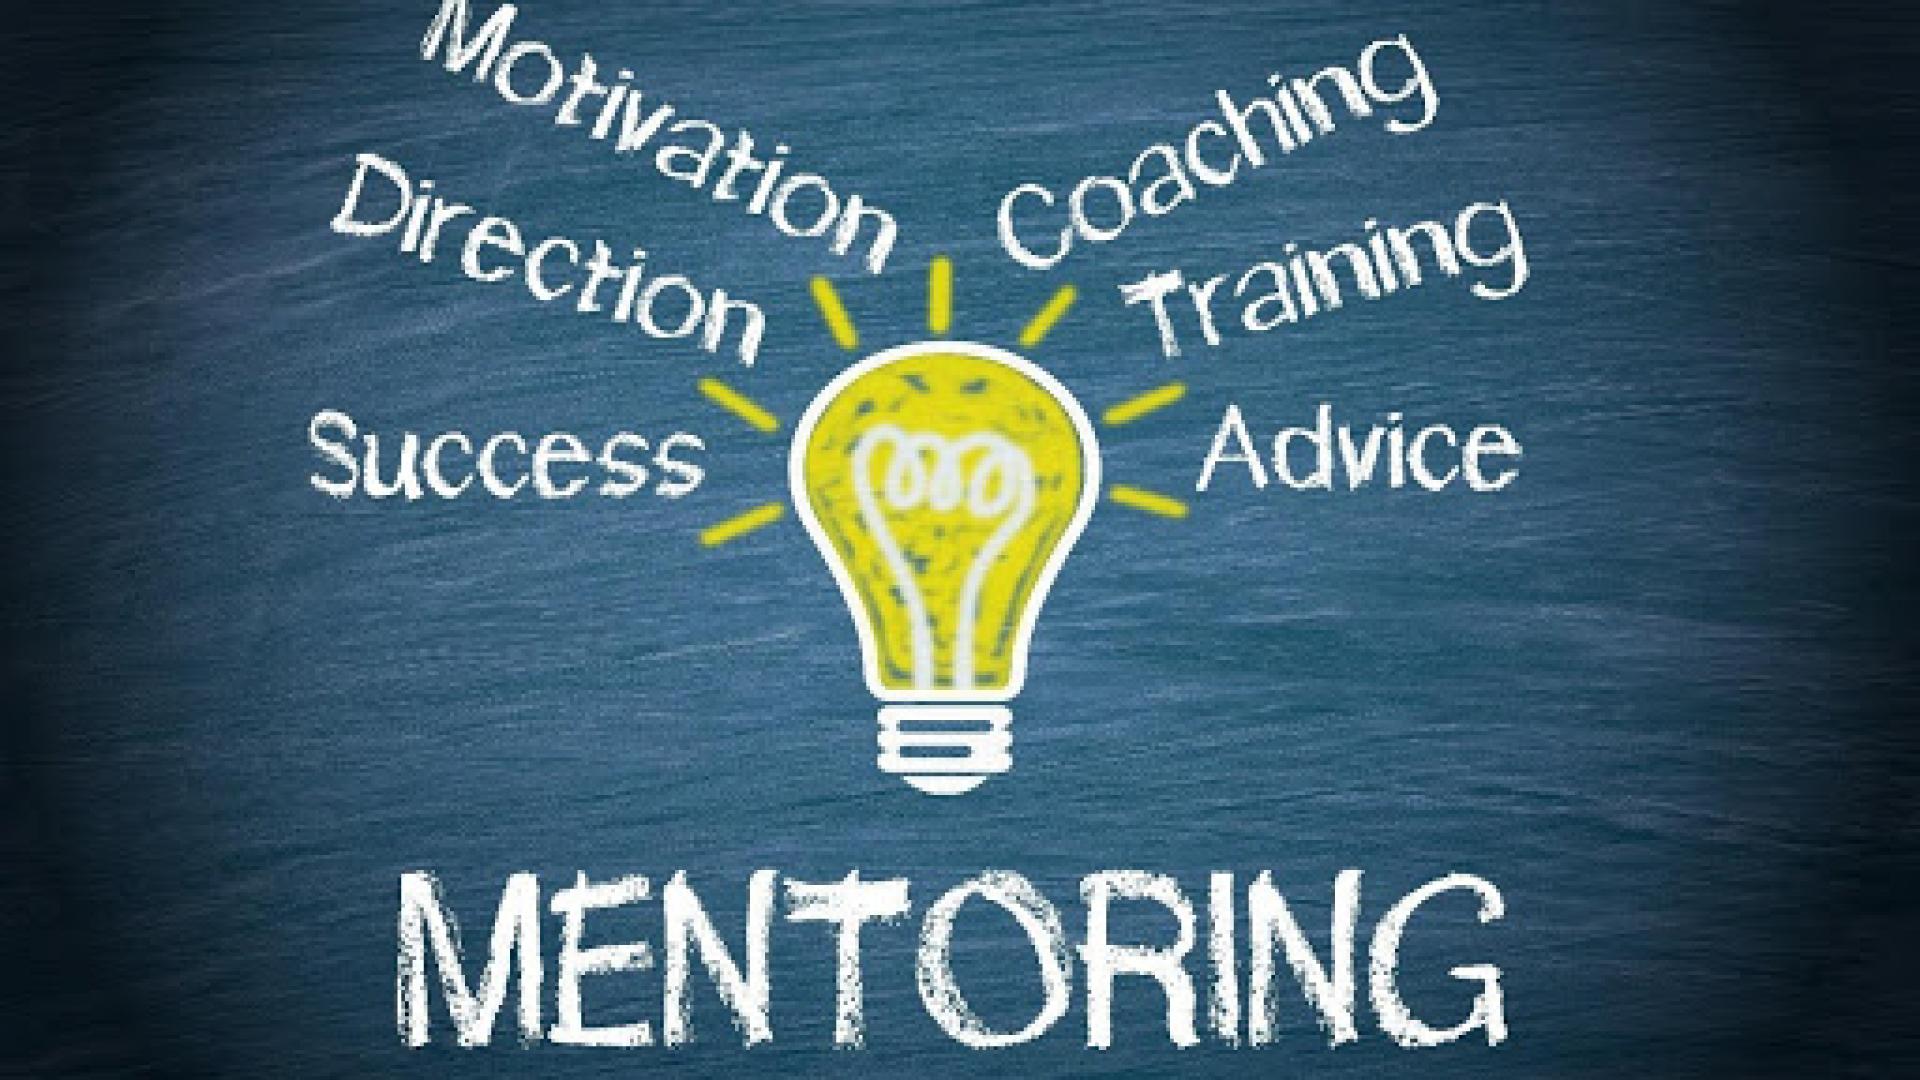 Lightbulb highlighting the key features of mentorship - motivation, direction, success, coaching, training, and advice